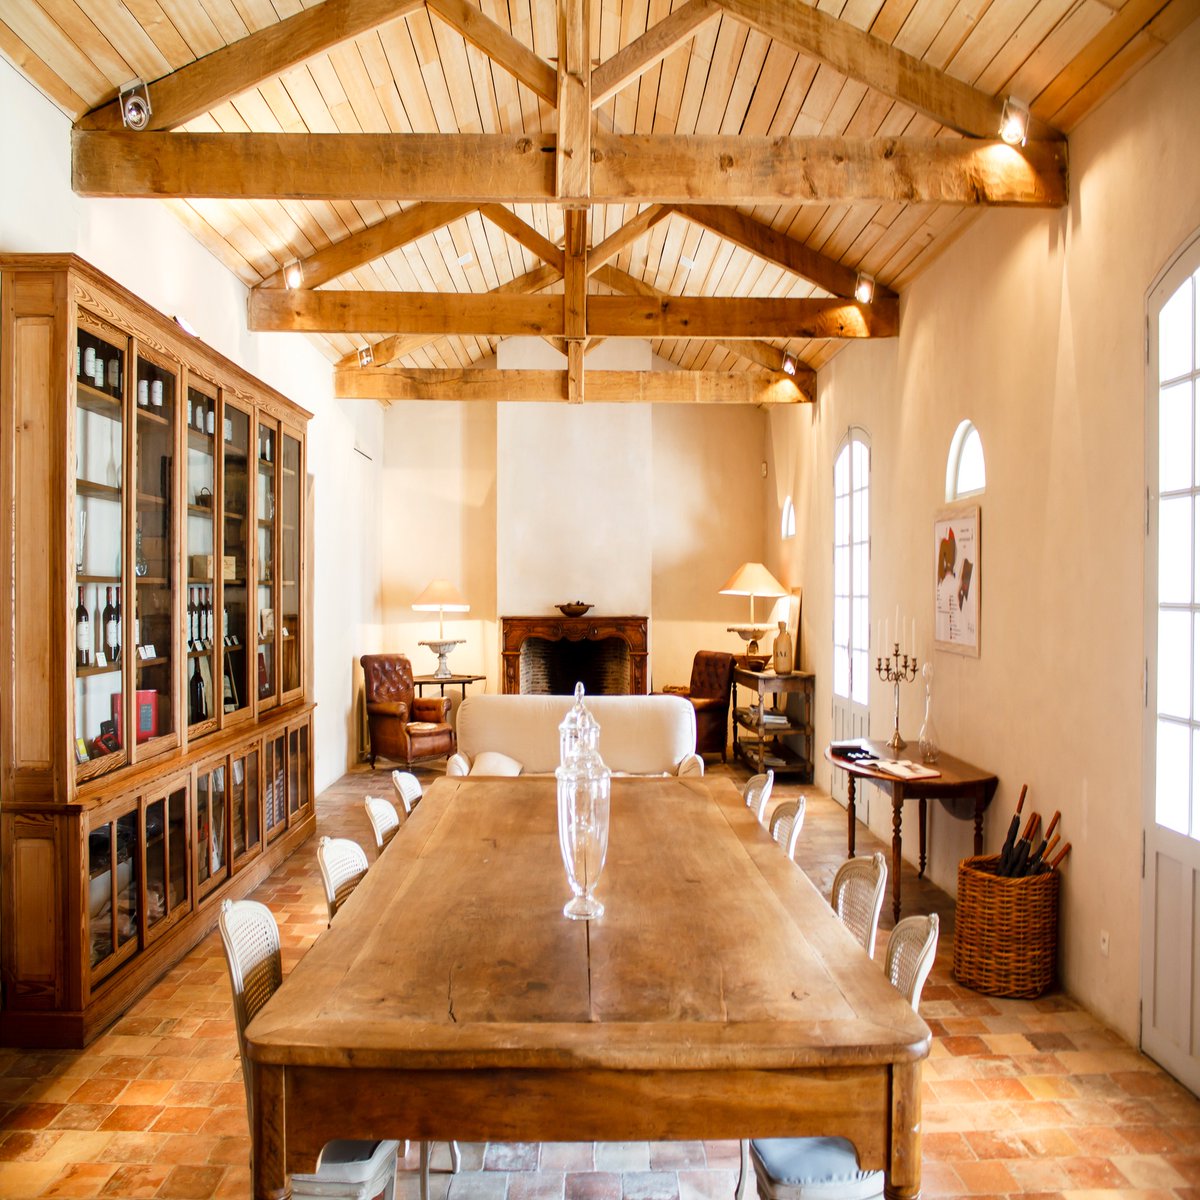 Exposed beams in the dining room give this space just what it needs to be perfect!

Would you like this in your home?

#dayrealestategroup #homeforsale #homeinterior #homes #newhomelook #remaxfinepropertiestx #changingliveseveryday